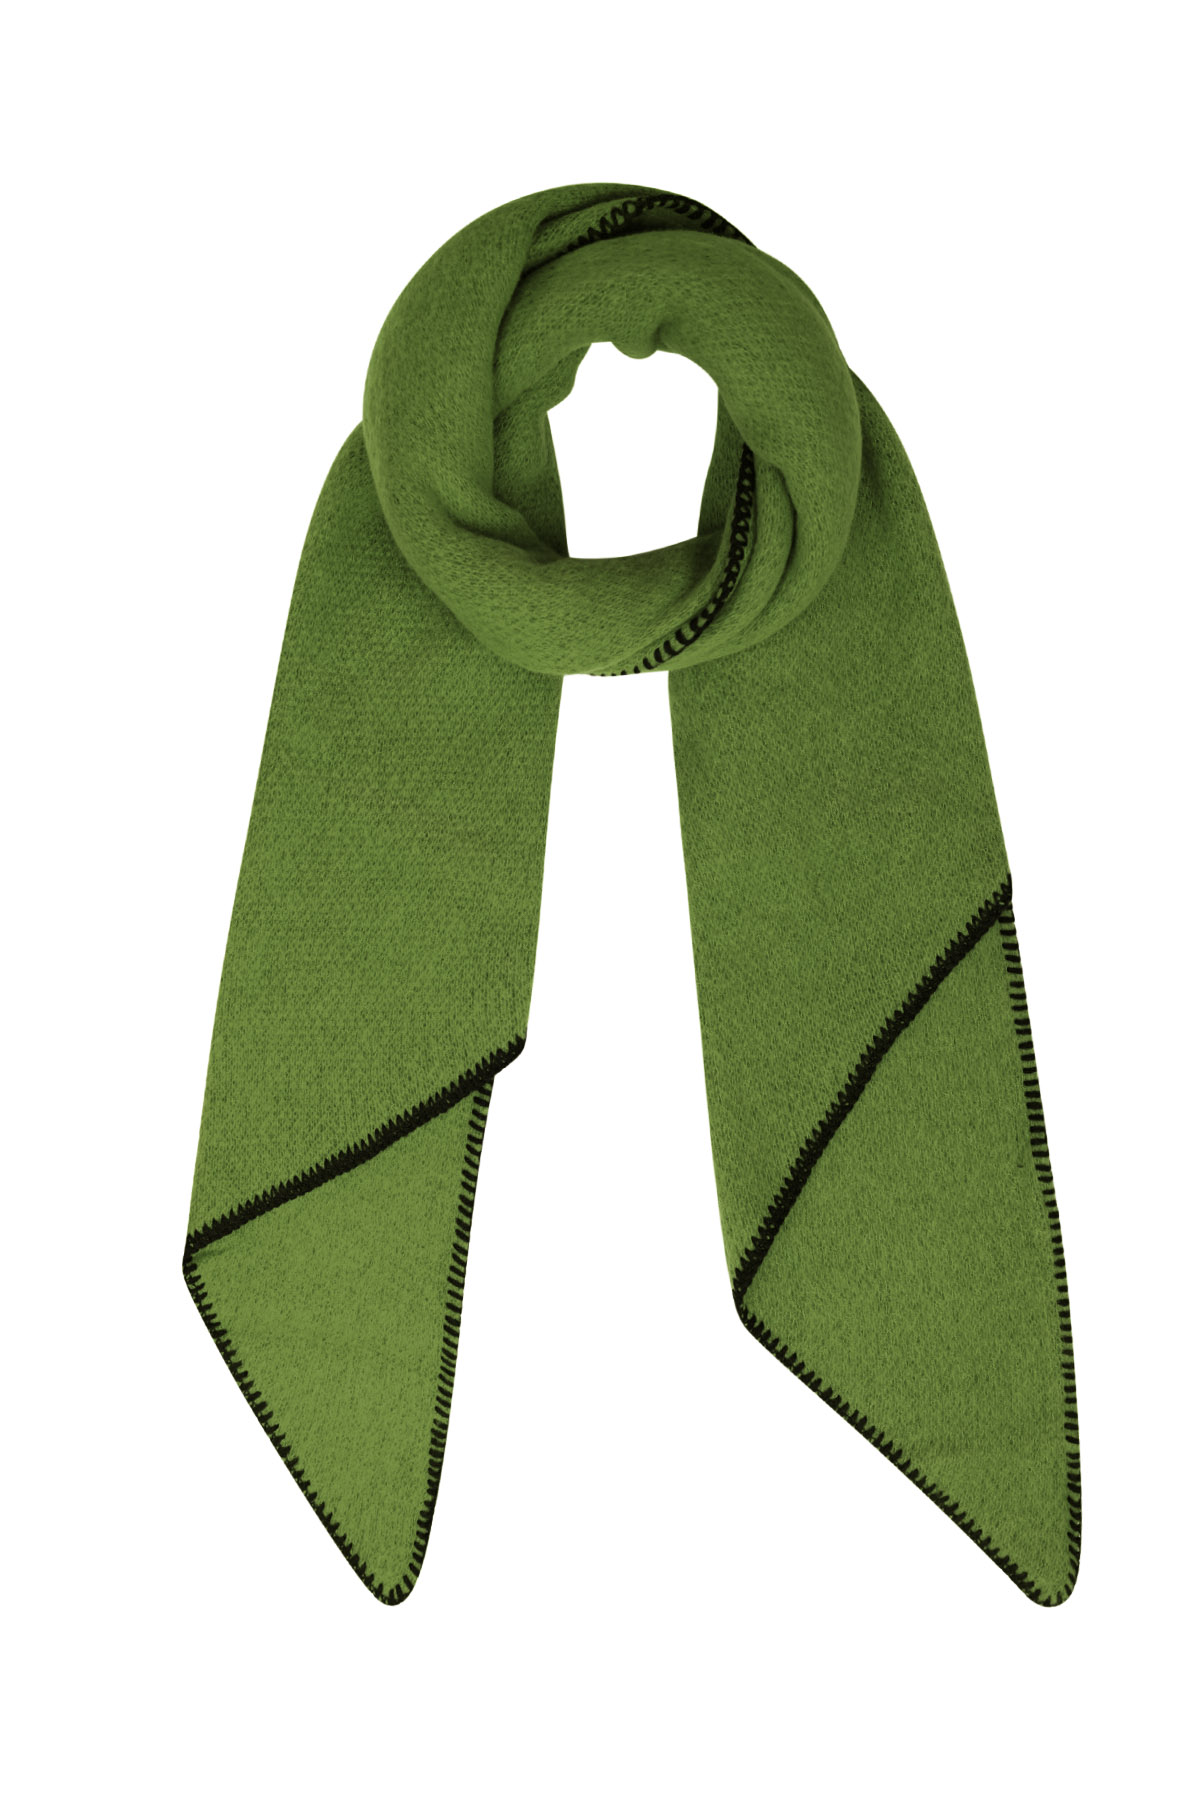 Winter scarf single-colored with black stitching - green h5 